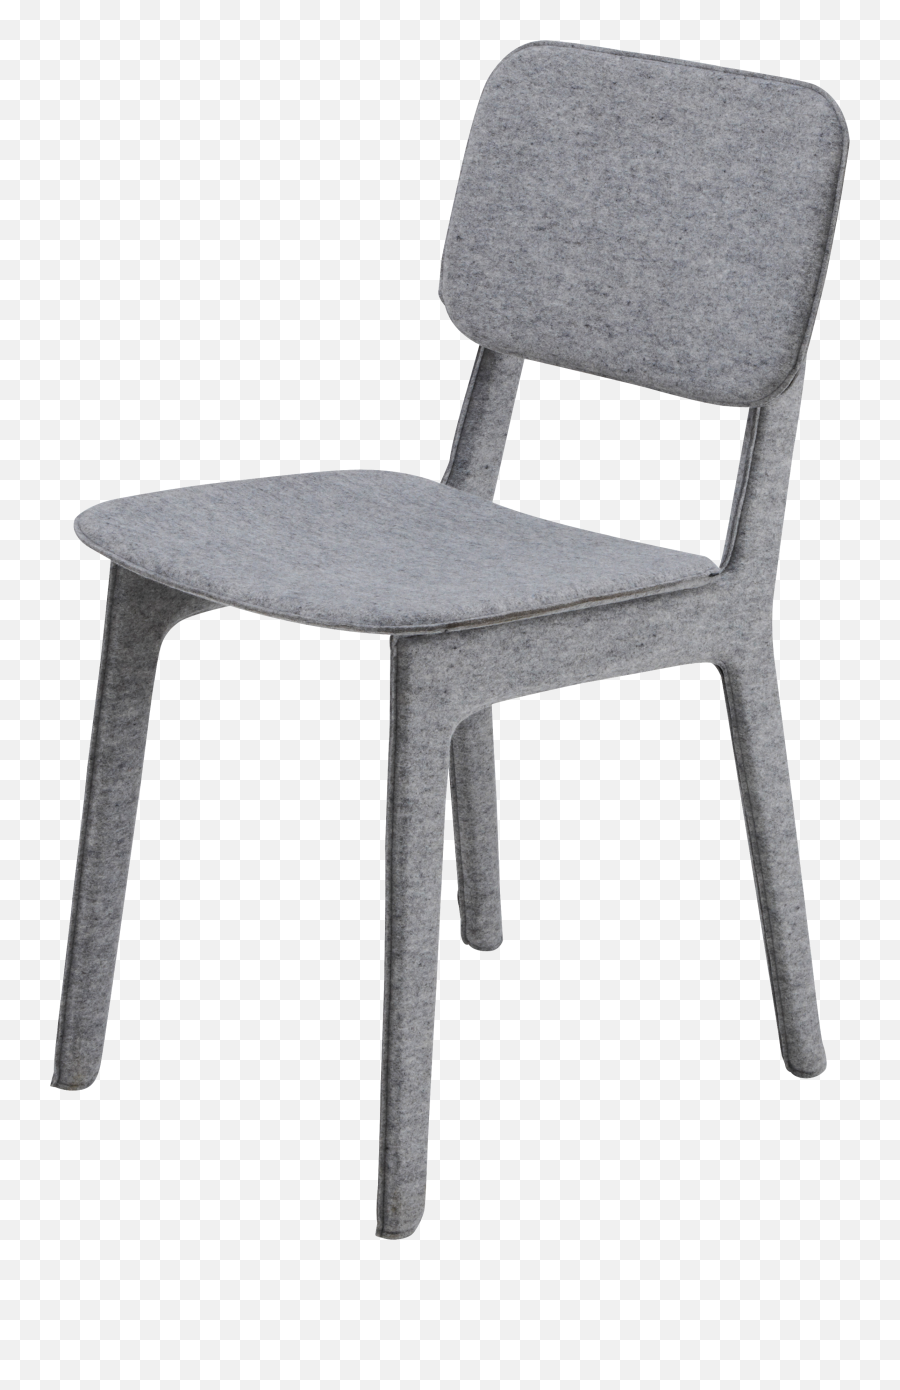 Chair Png Image - Transparent Transparent Background Chair Png Emoji,Chair Png